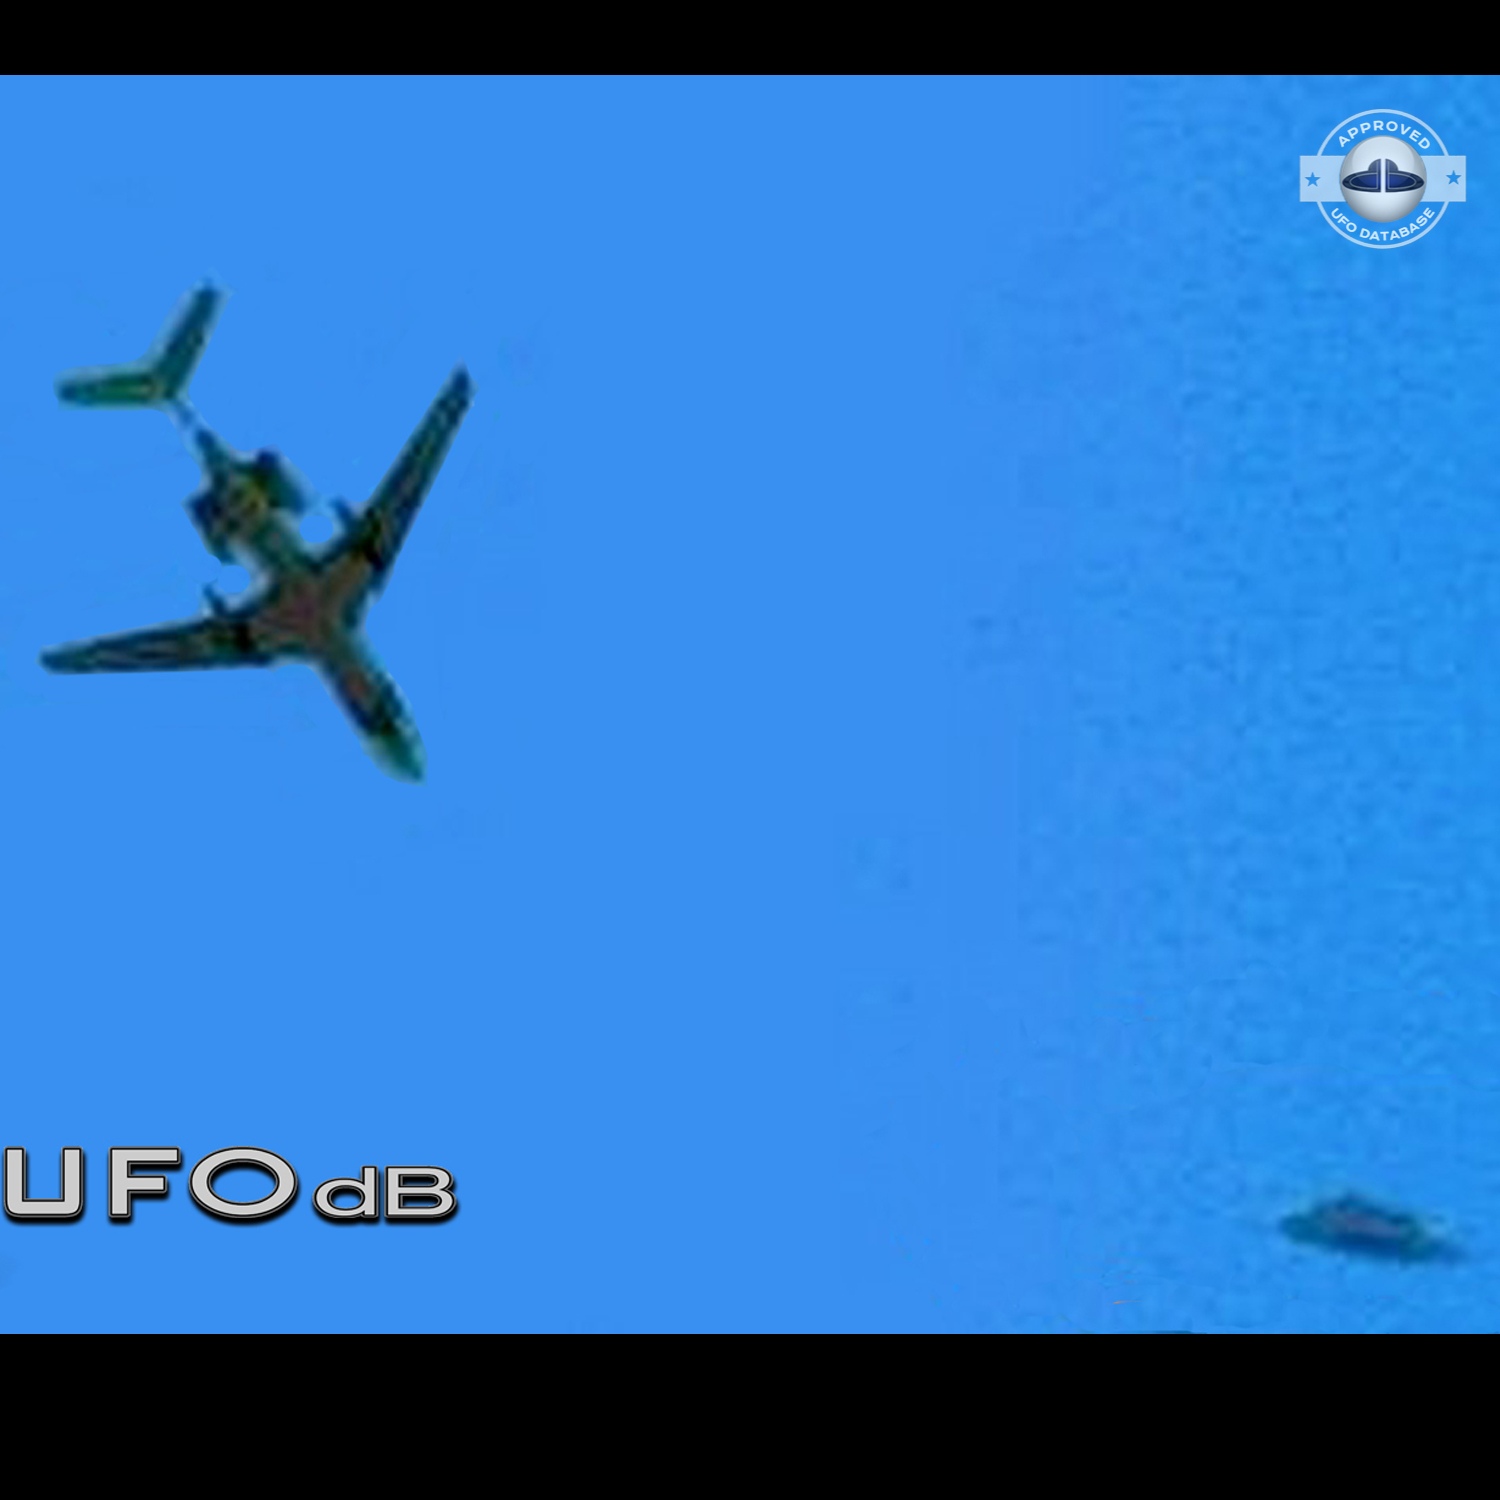 Picture of UFO near airplane over Vnukovo Airport | Moscow, Russia UFO Picture #179-2